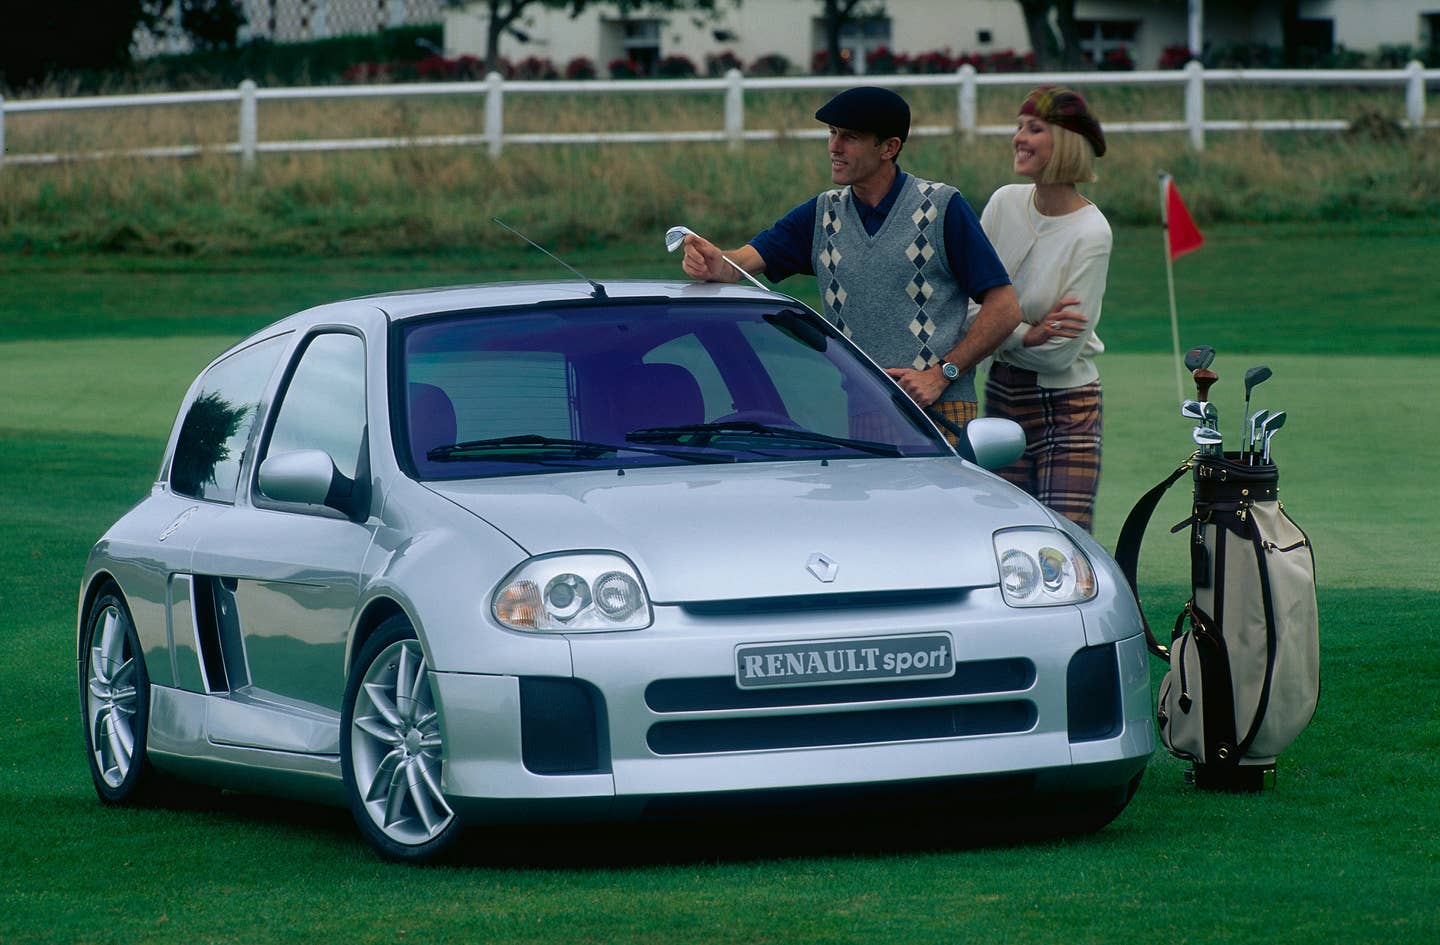 Press photo of Renault Clio V6 on golf course with golfers posed near car.